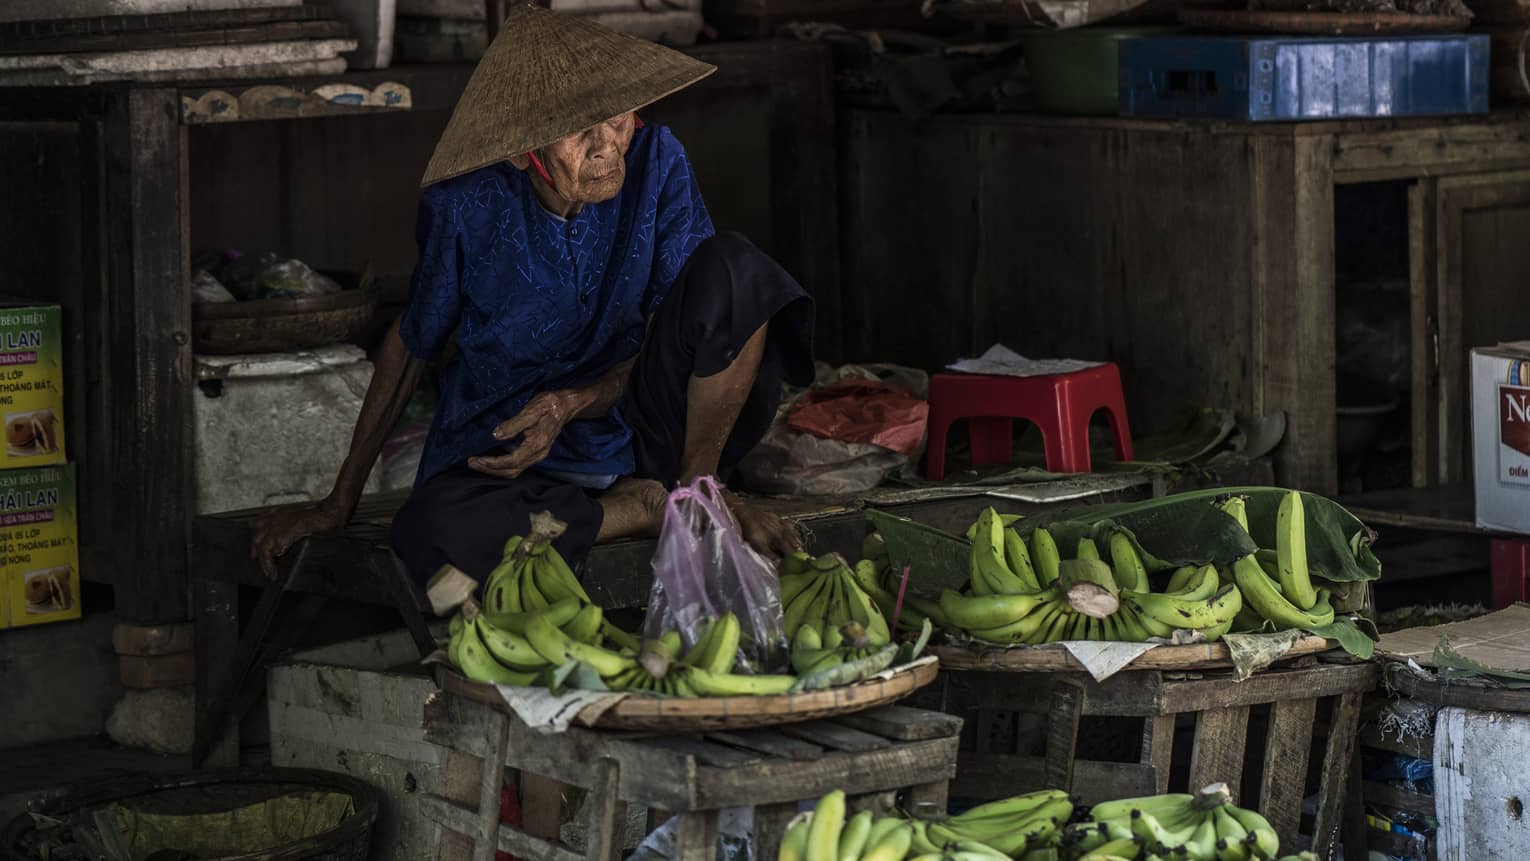 An elderly farmer wearing a blue outfit and woven straw hat selling bananas at a farm stand in Hoi An Historical Town